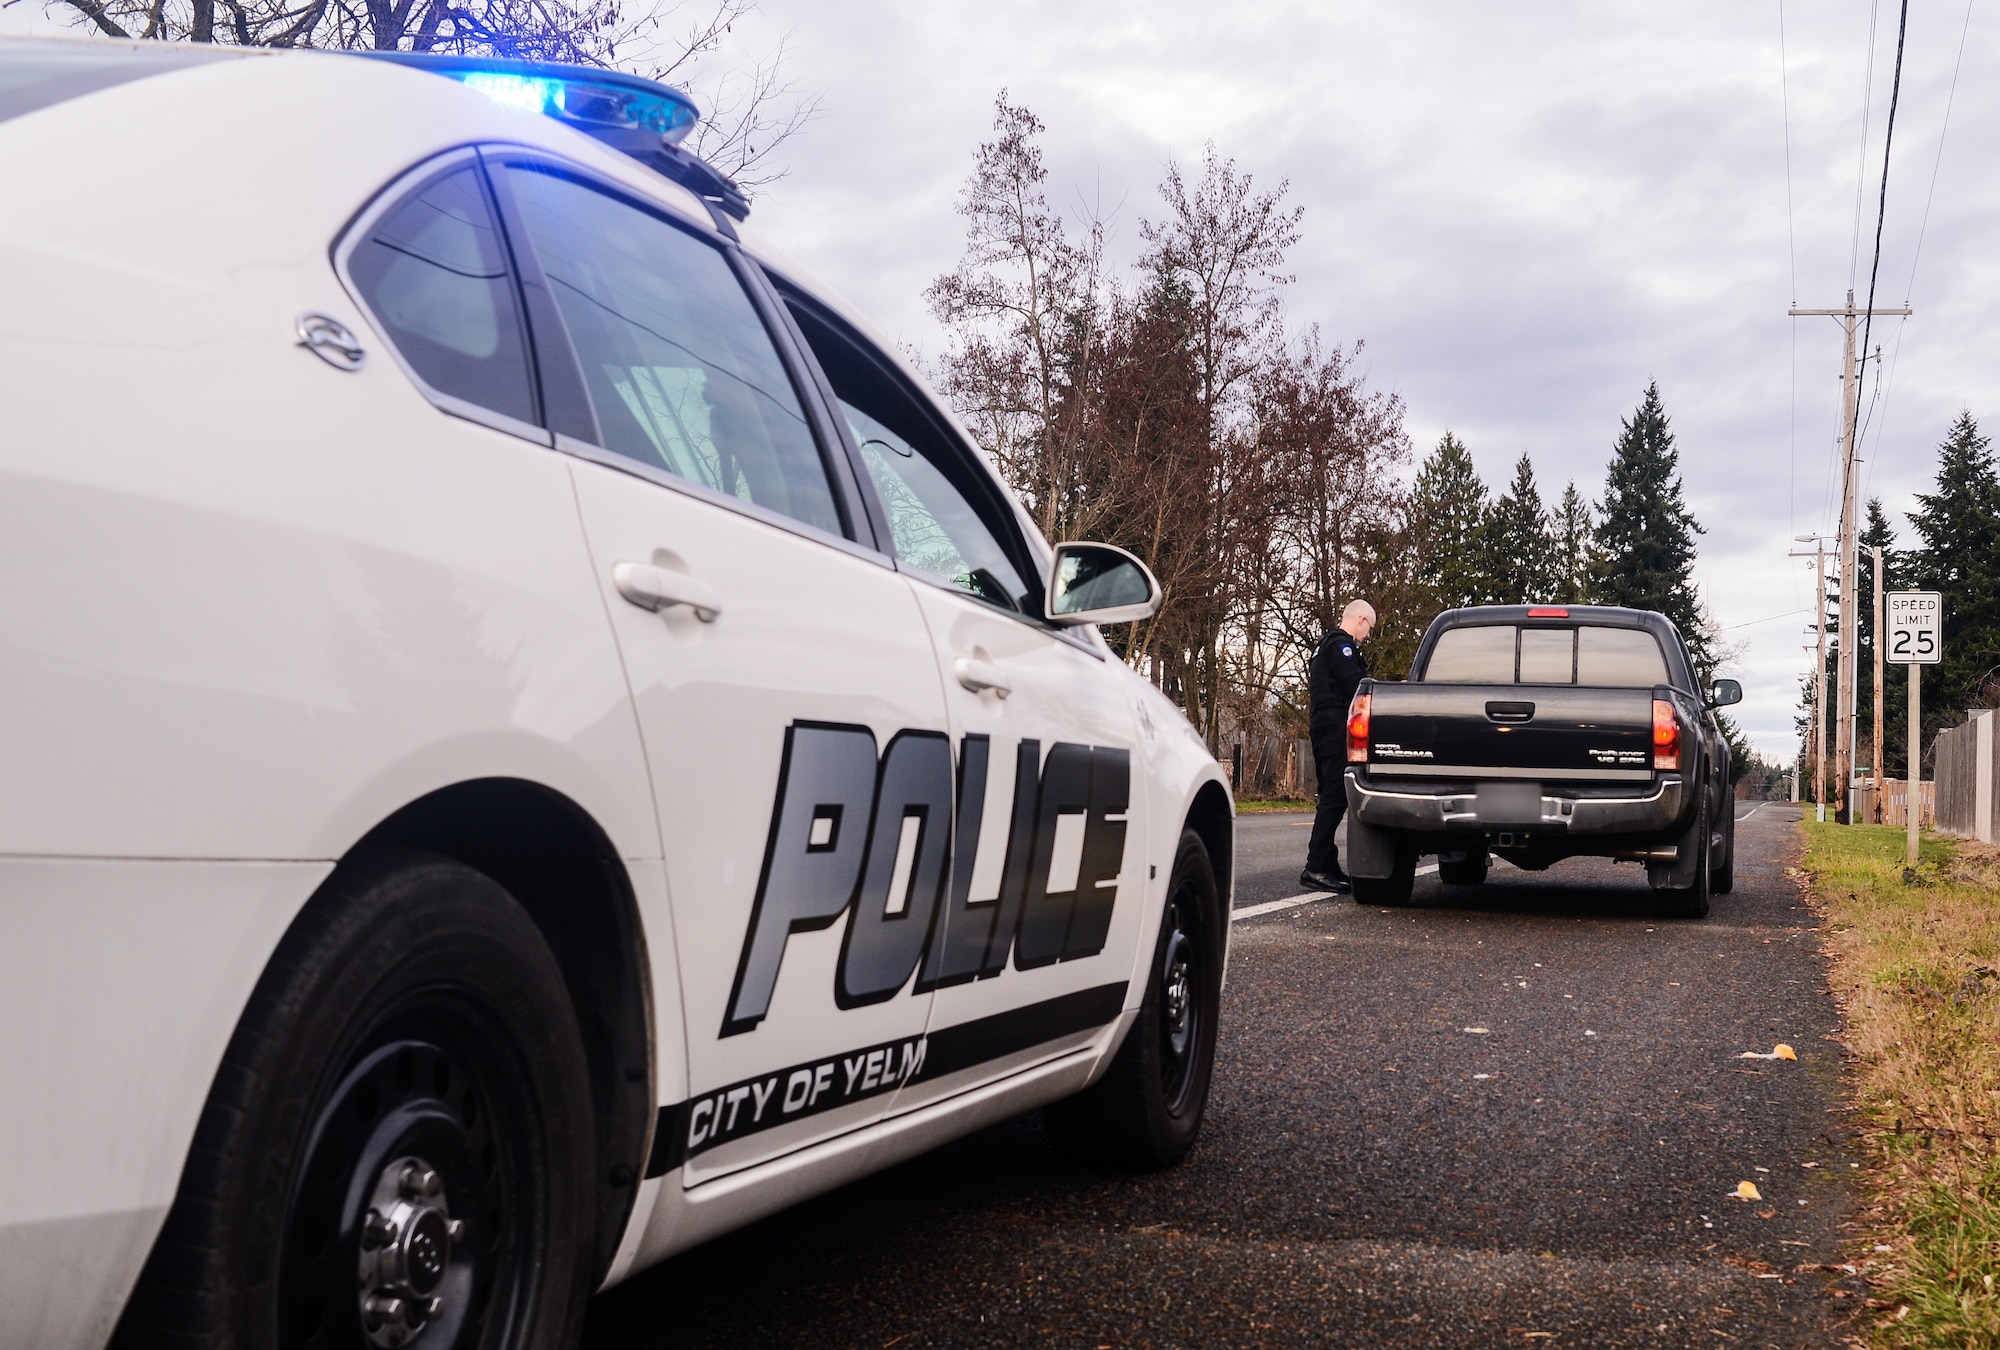 Master Sgt. Phil Ryan, 62nd Airlift Wing Inspector General complaint resolution superintendent, also a reserve police officer at the Yelm Police Department, collects a driver's information following a traffic stop, Dec. 14, 2013, in Yelm, Wash. As a sworn peace officer, Ryan volunteers his free time with police department. (U.S. Air Force photo/Tech. Sgt. Sean Tobin)